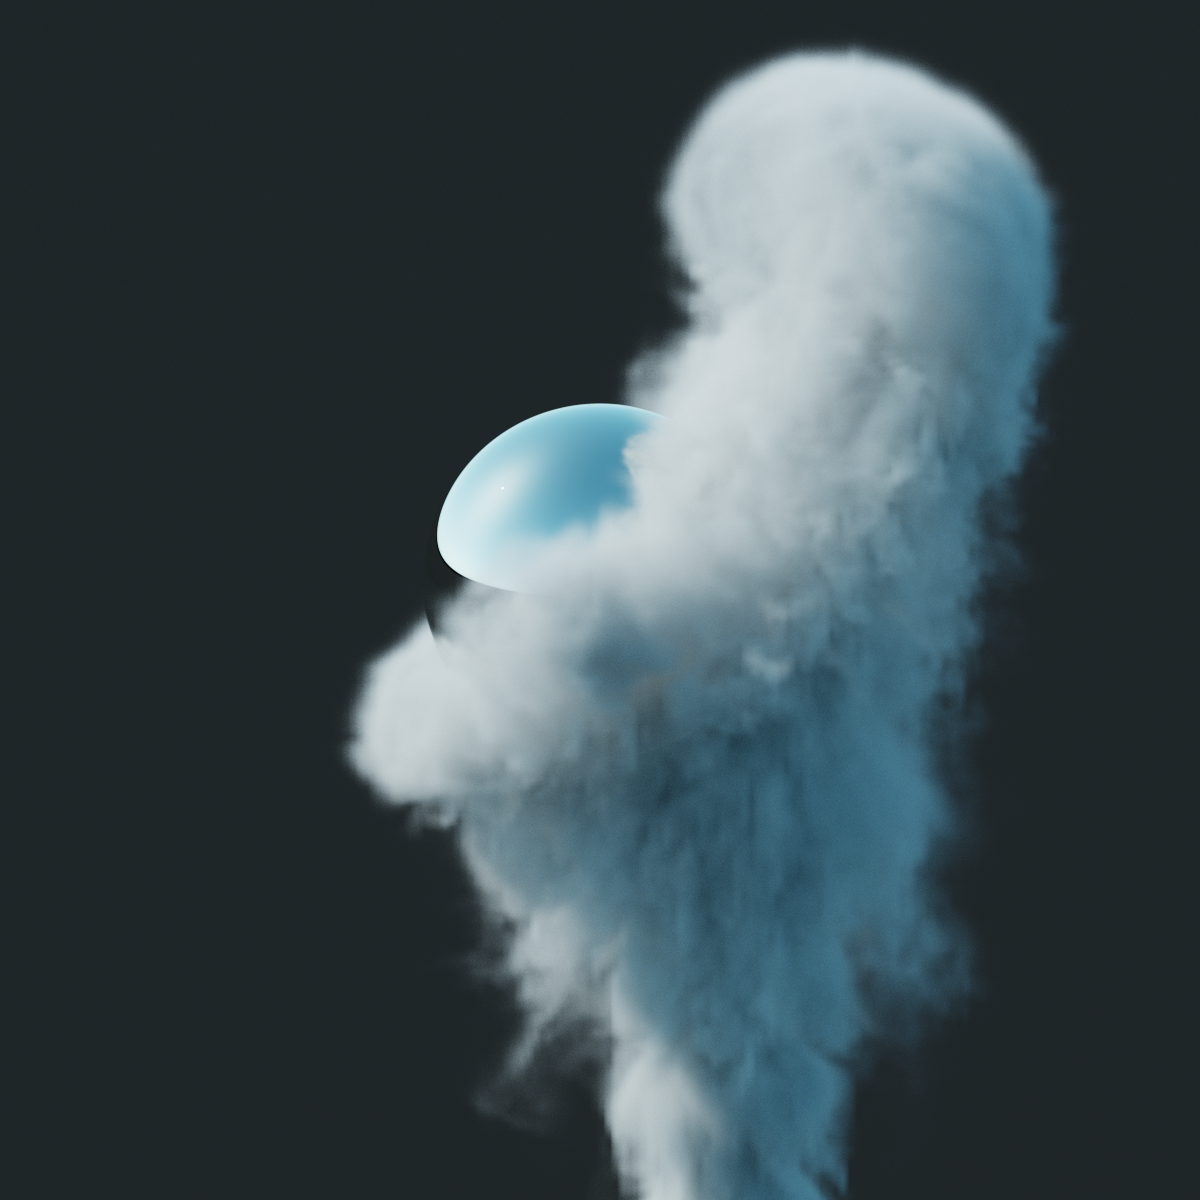 Smoke plume with sphere